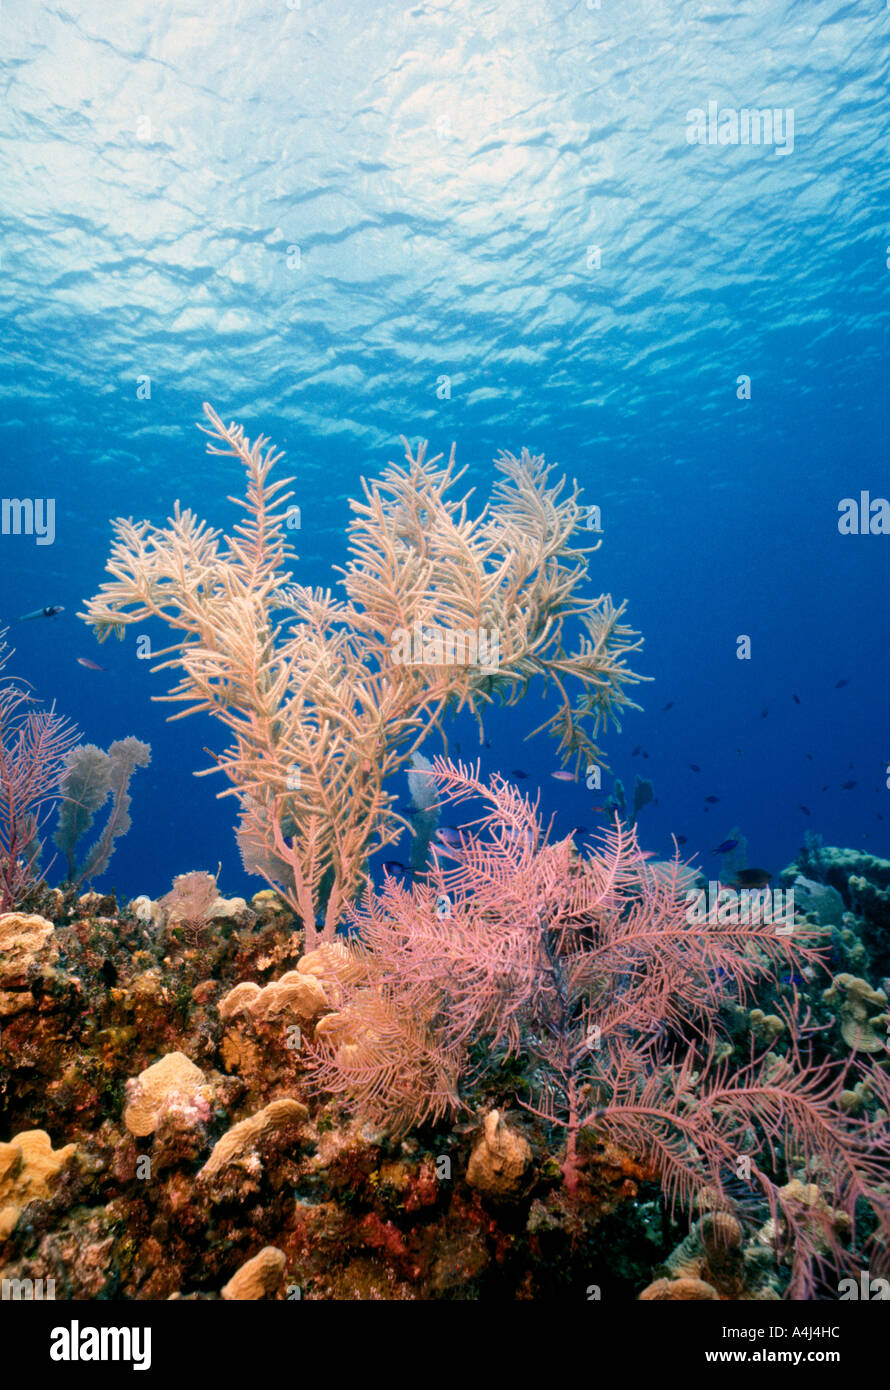 Underwater Coral Reef soft corals with bright colors looking toward clear water surface Stock Photo